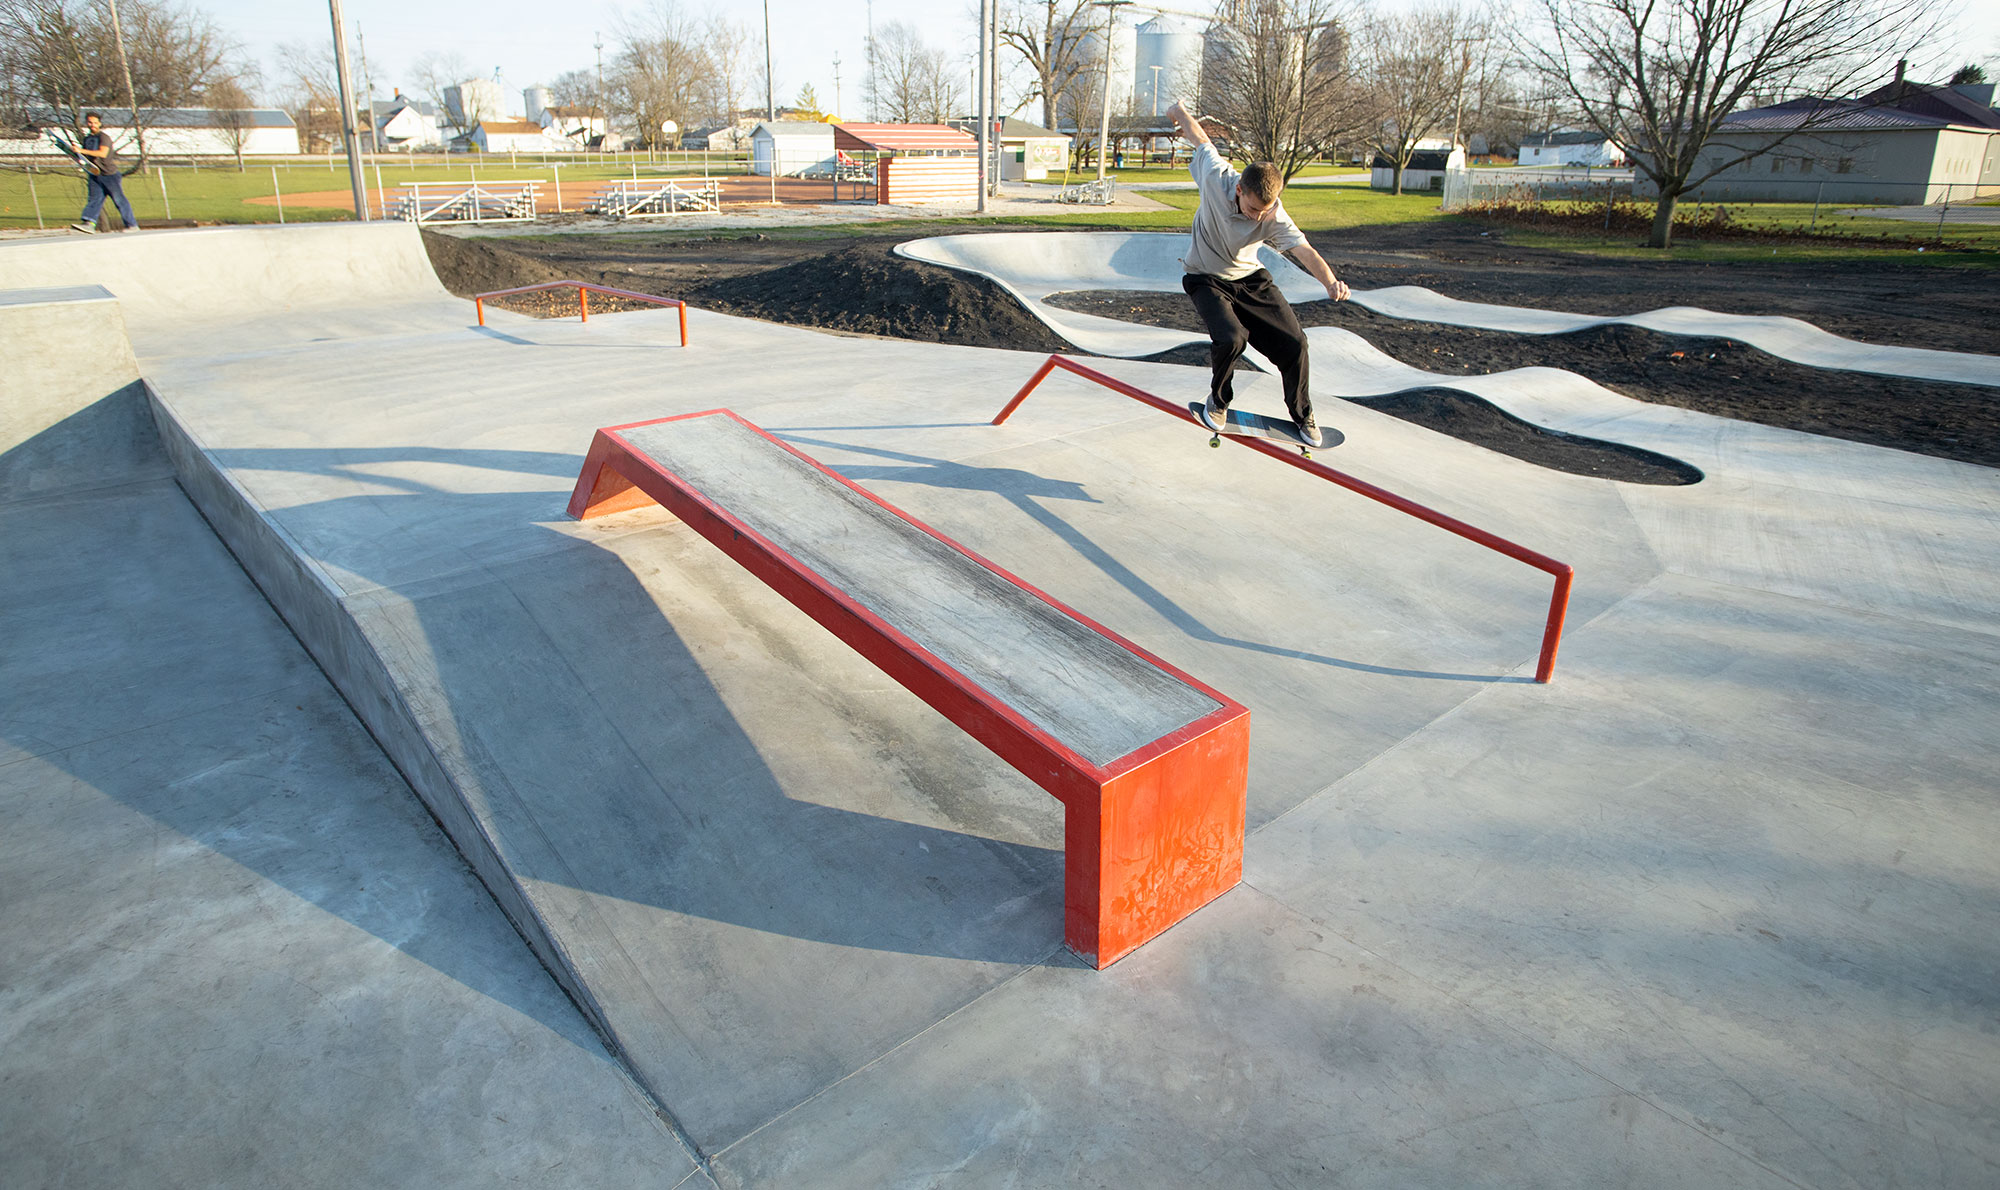 Feeble grind down the orange handrail at the skatepark located in Gibson City, IL